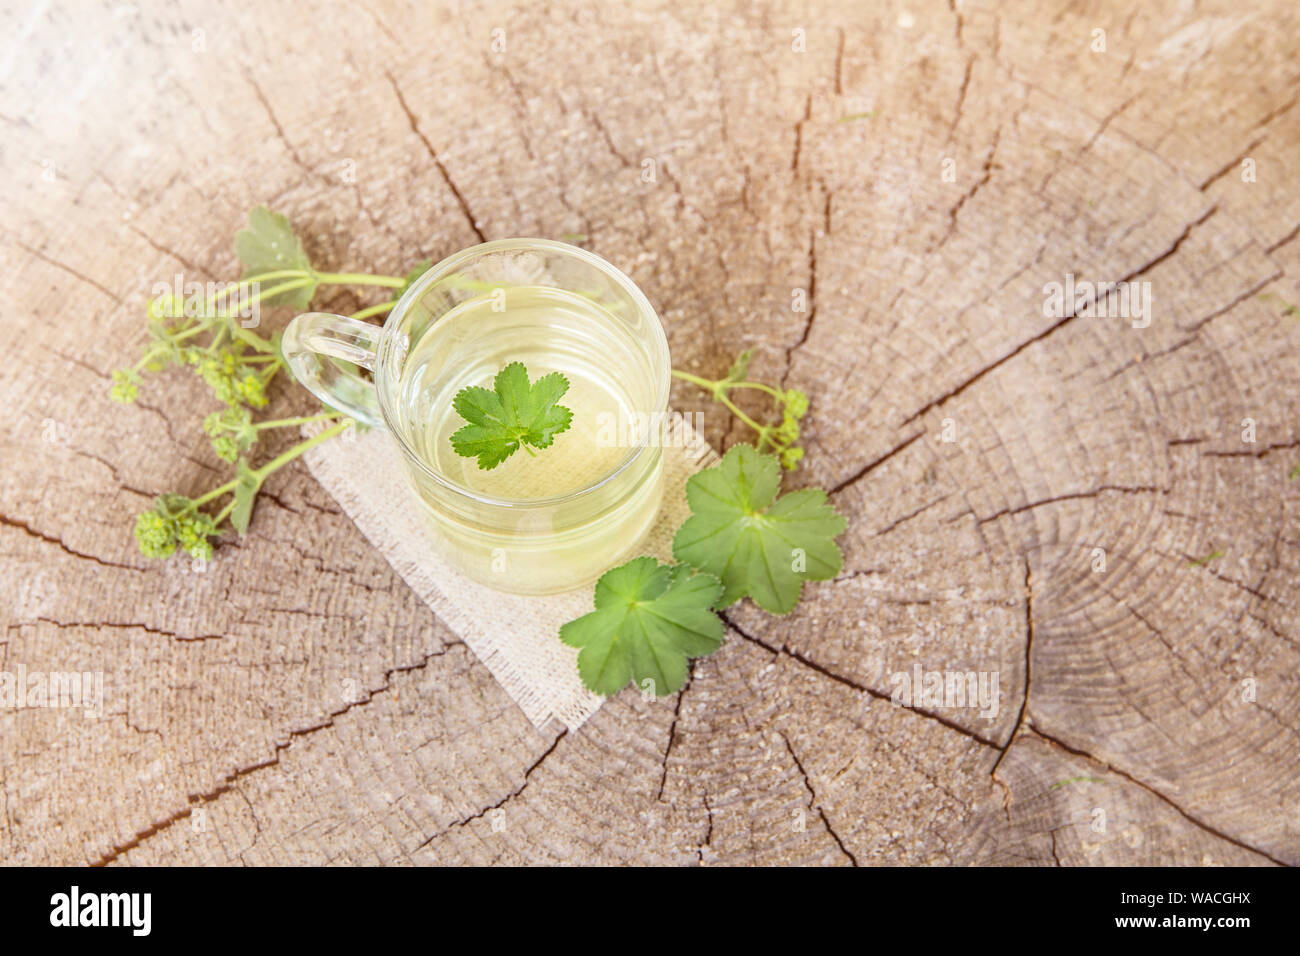 Alchemilla vulgaris, common lady's mantle medicinal herbal tea concept. Composition on natural wooden background. Stock Photo